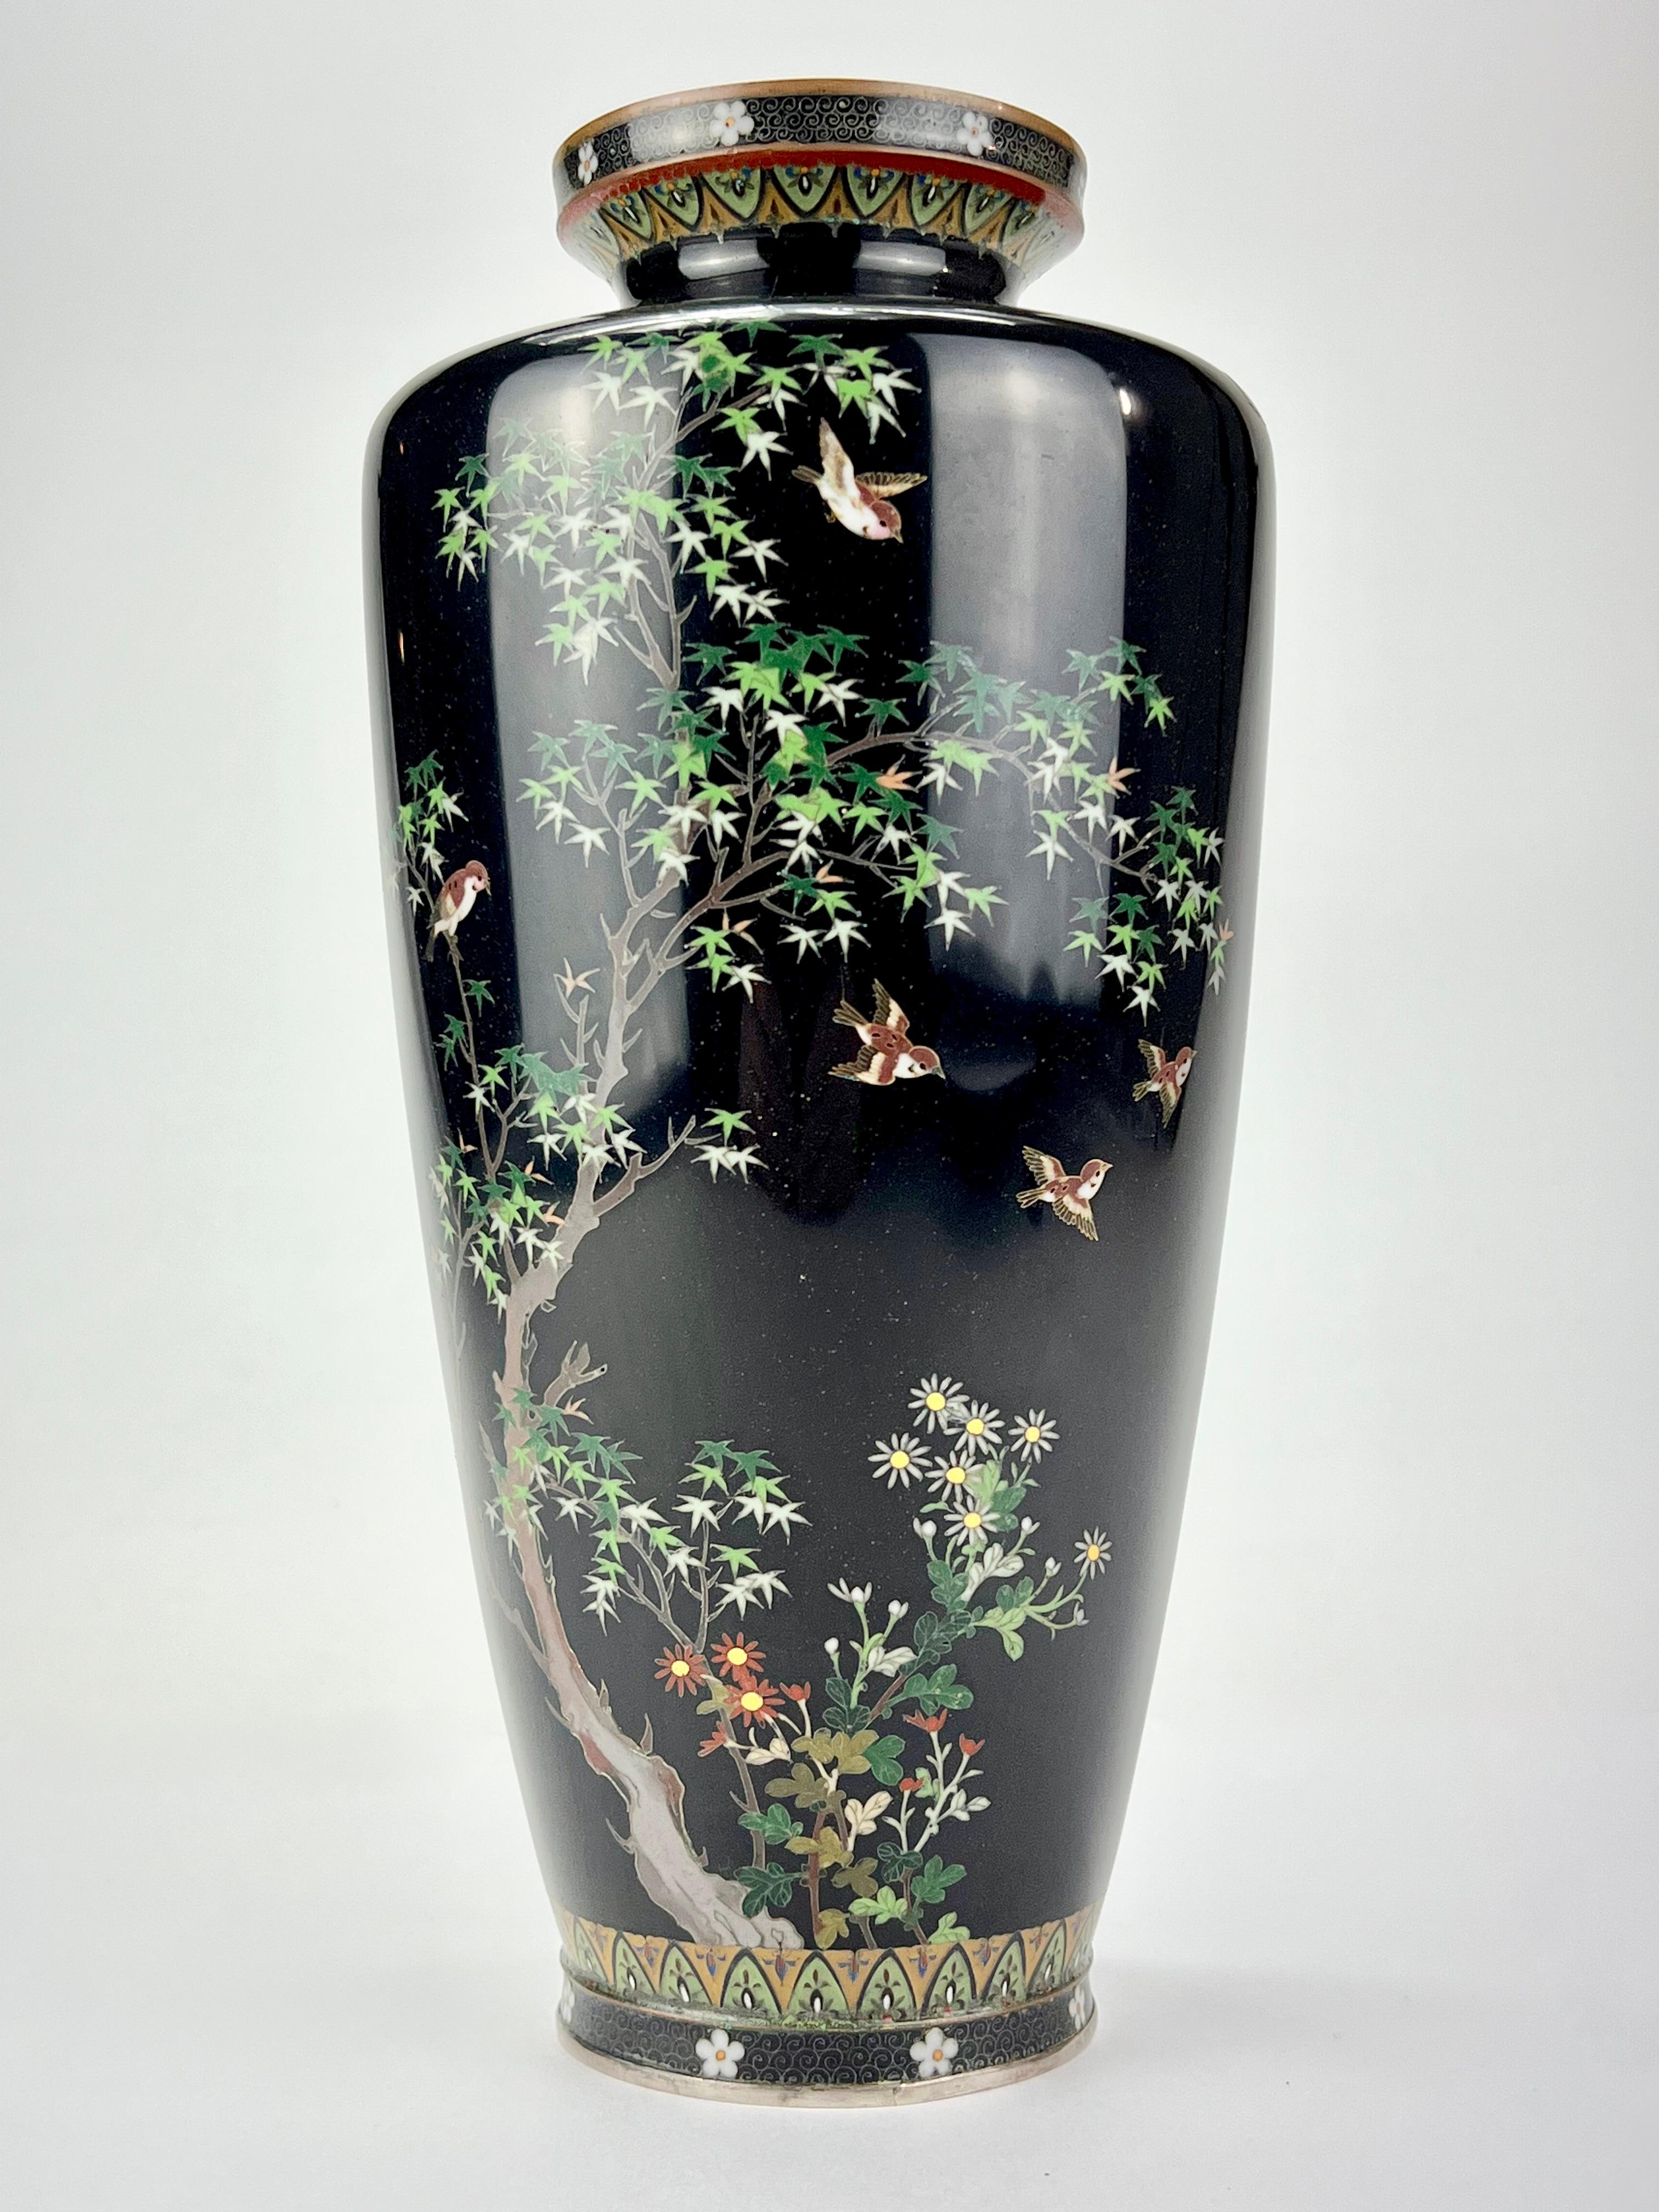 Available from Shogun's Gallery in Portland, Oregon for over 40 years specializing in Asian Arts & Antiques.

This is a unique Japanese Meiji era (c. 1880) ornate Cloisonné vase. Made of silver, copper alloys and vitreous glass enamel. Marked